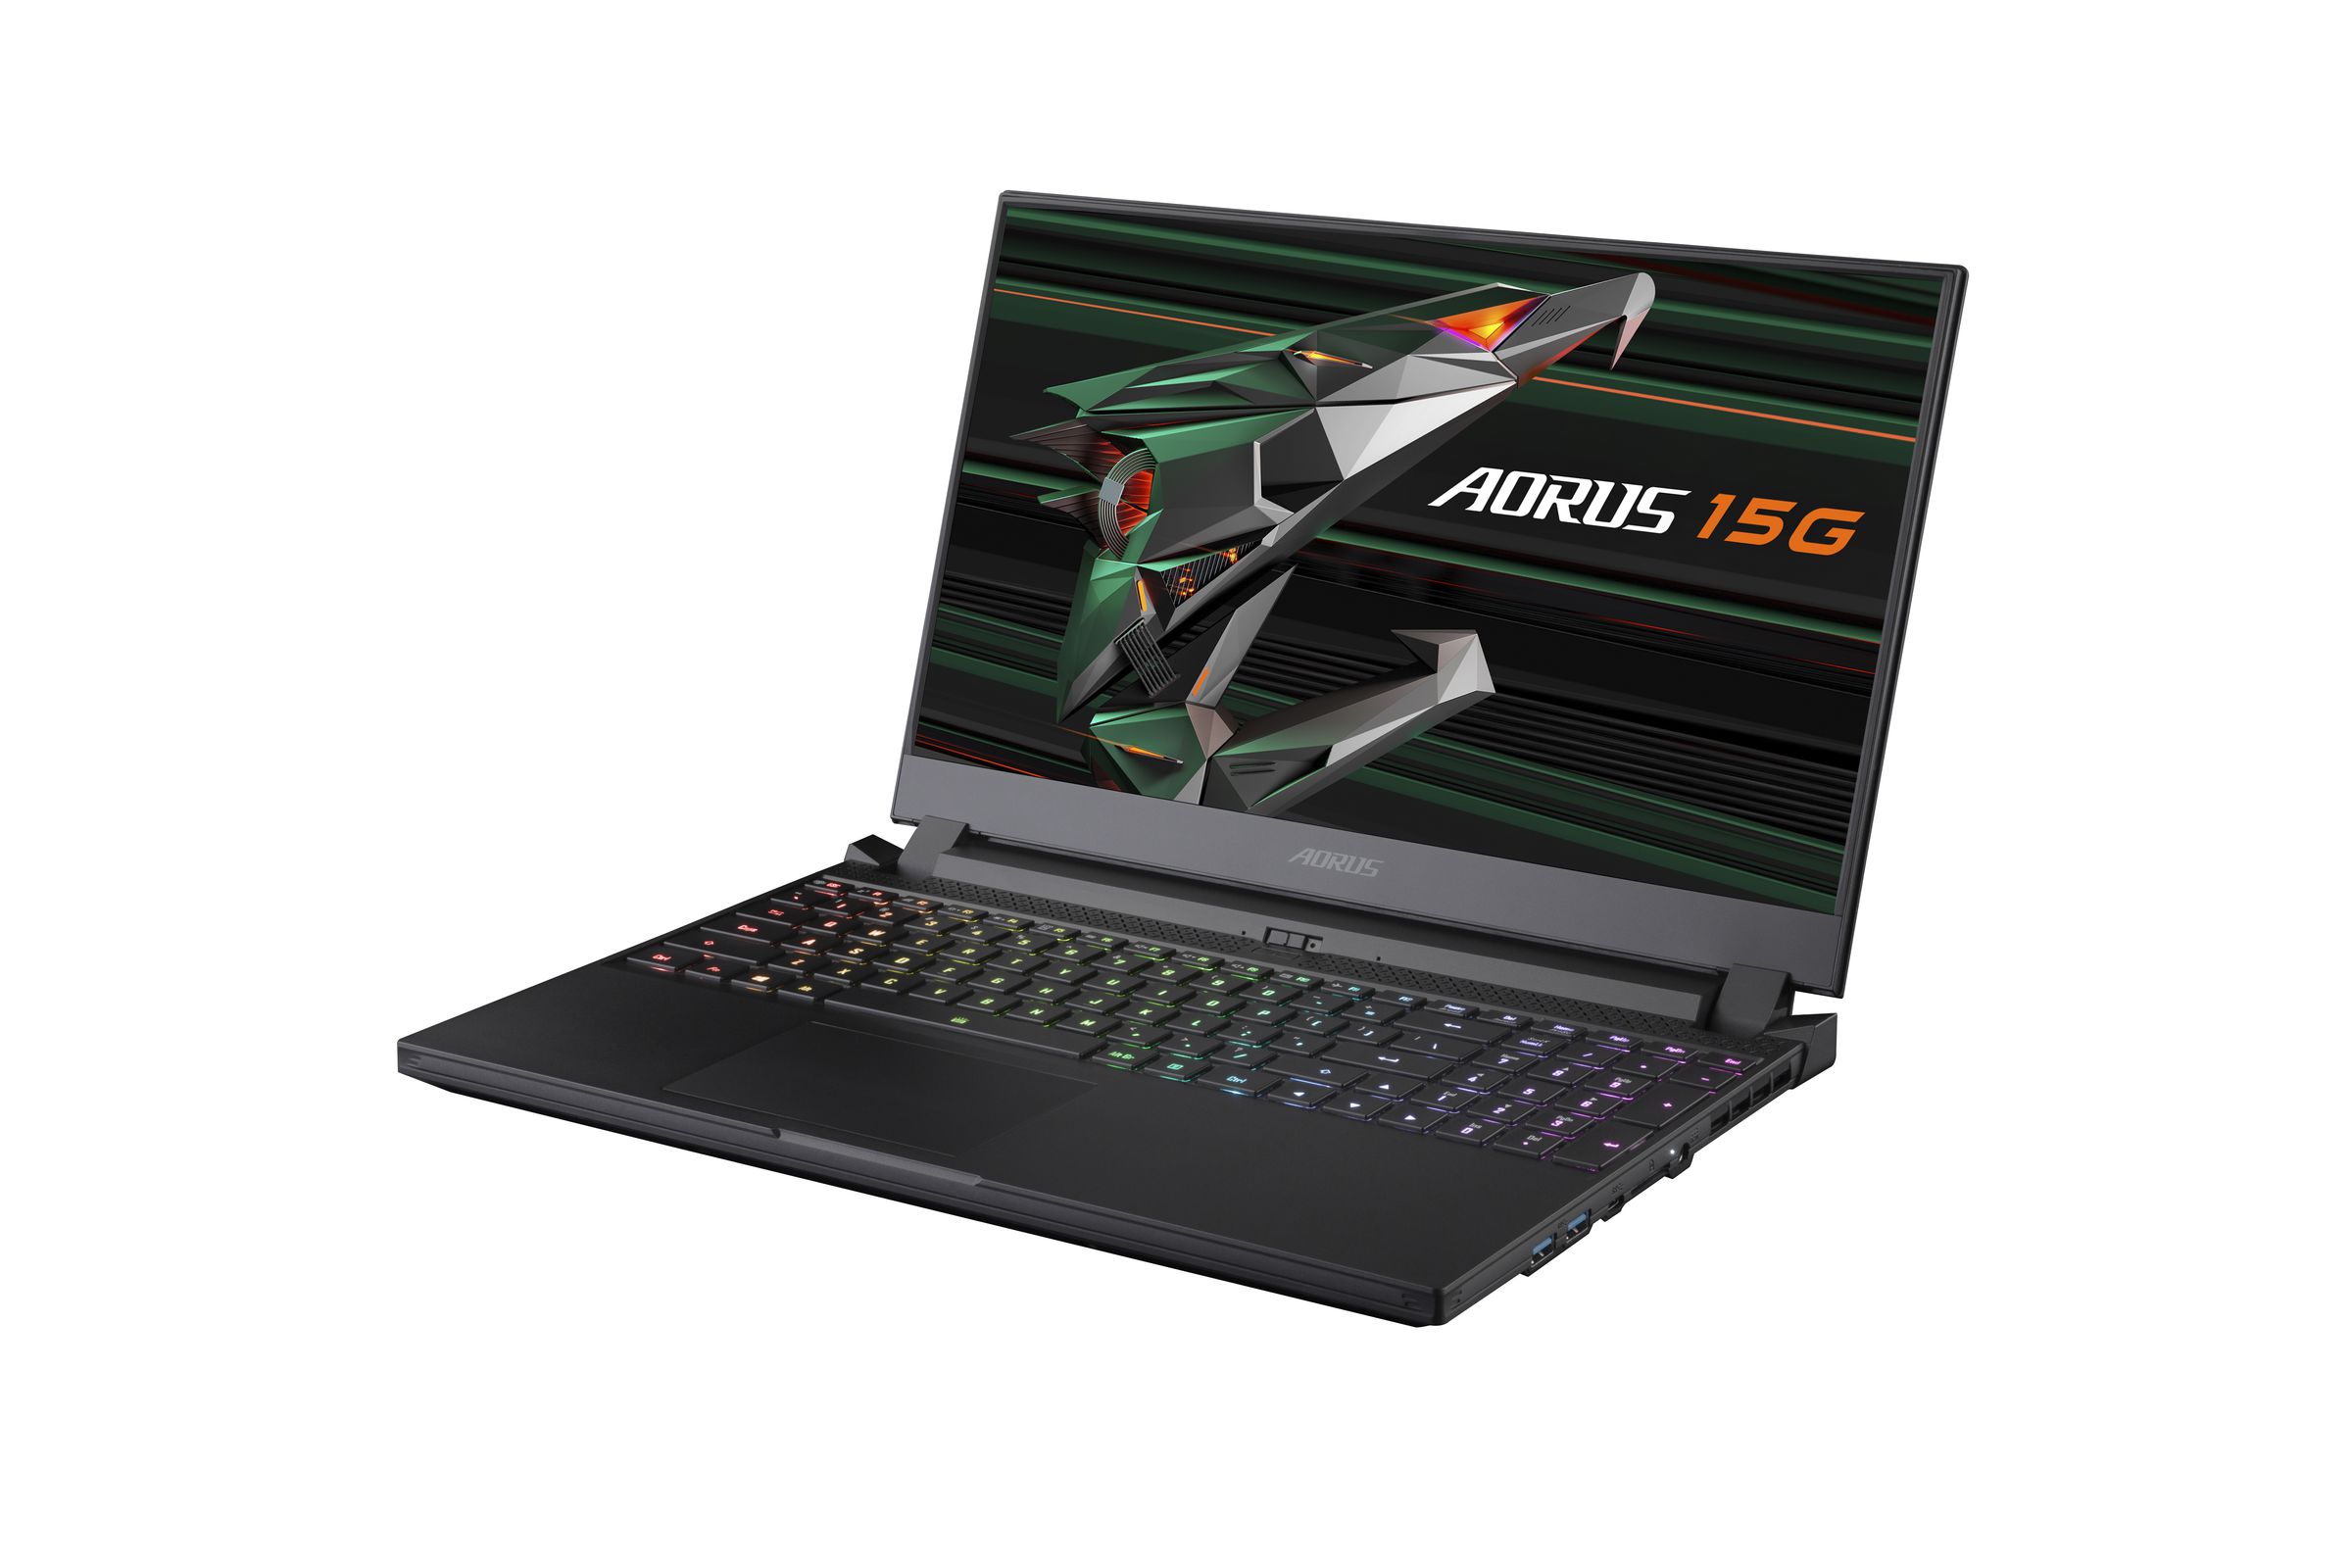 The Aorus 15G open on a white background angled to the left. The Aorus 15G logo is displayed on the screen and the RGB keyboard is illuminated.